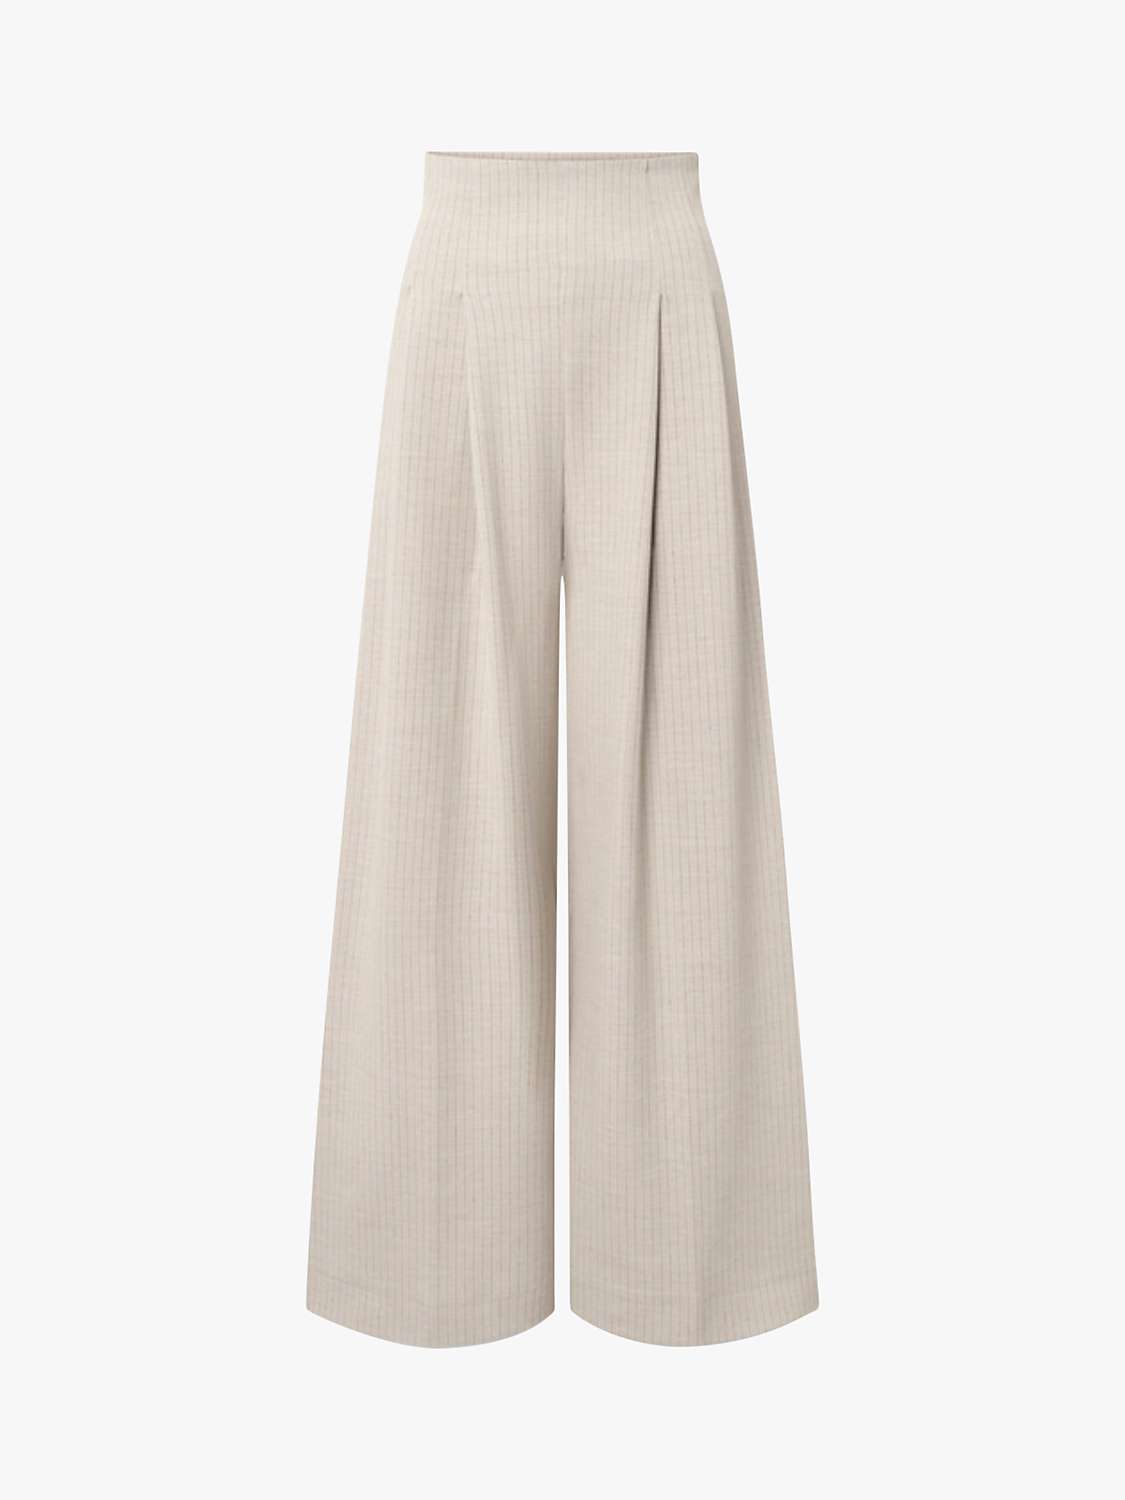 Buy Lovechild 1979 Penny Stripe High Waist Trousers, Brown Online at johnlewis.com